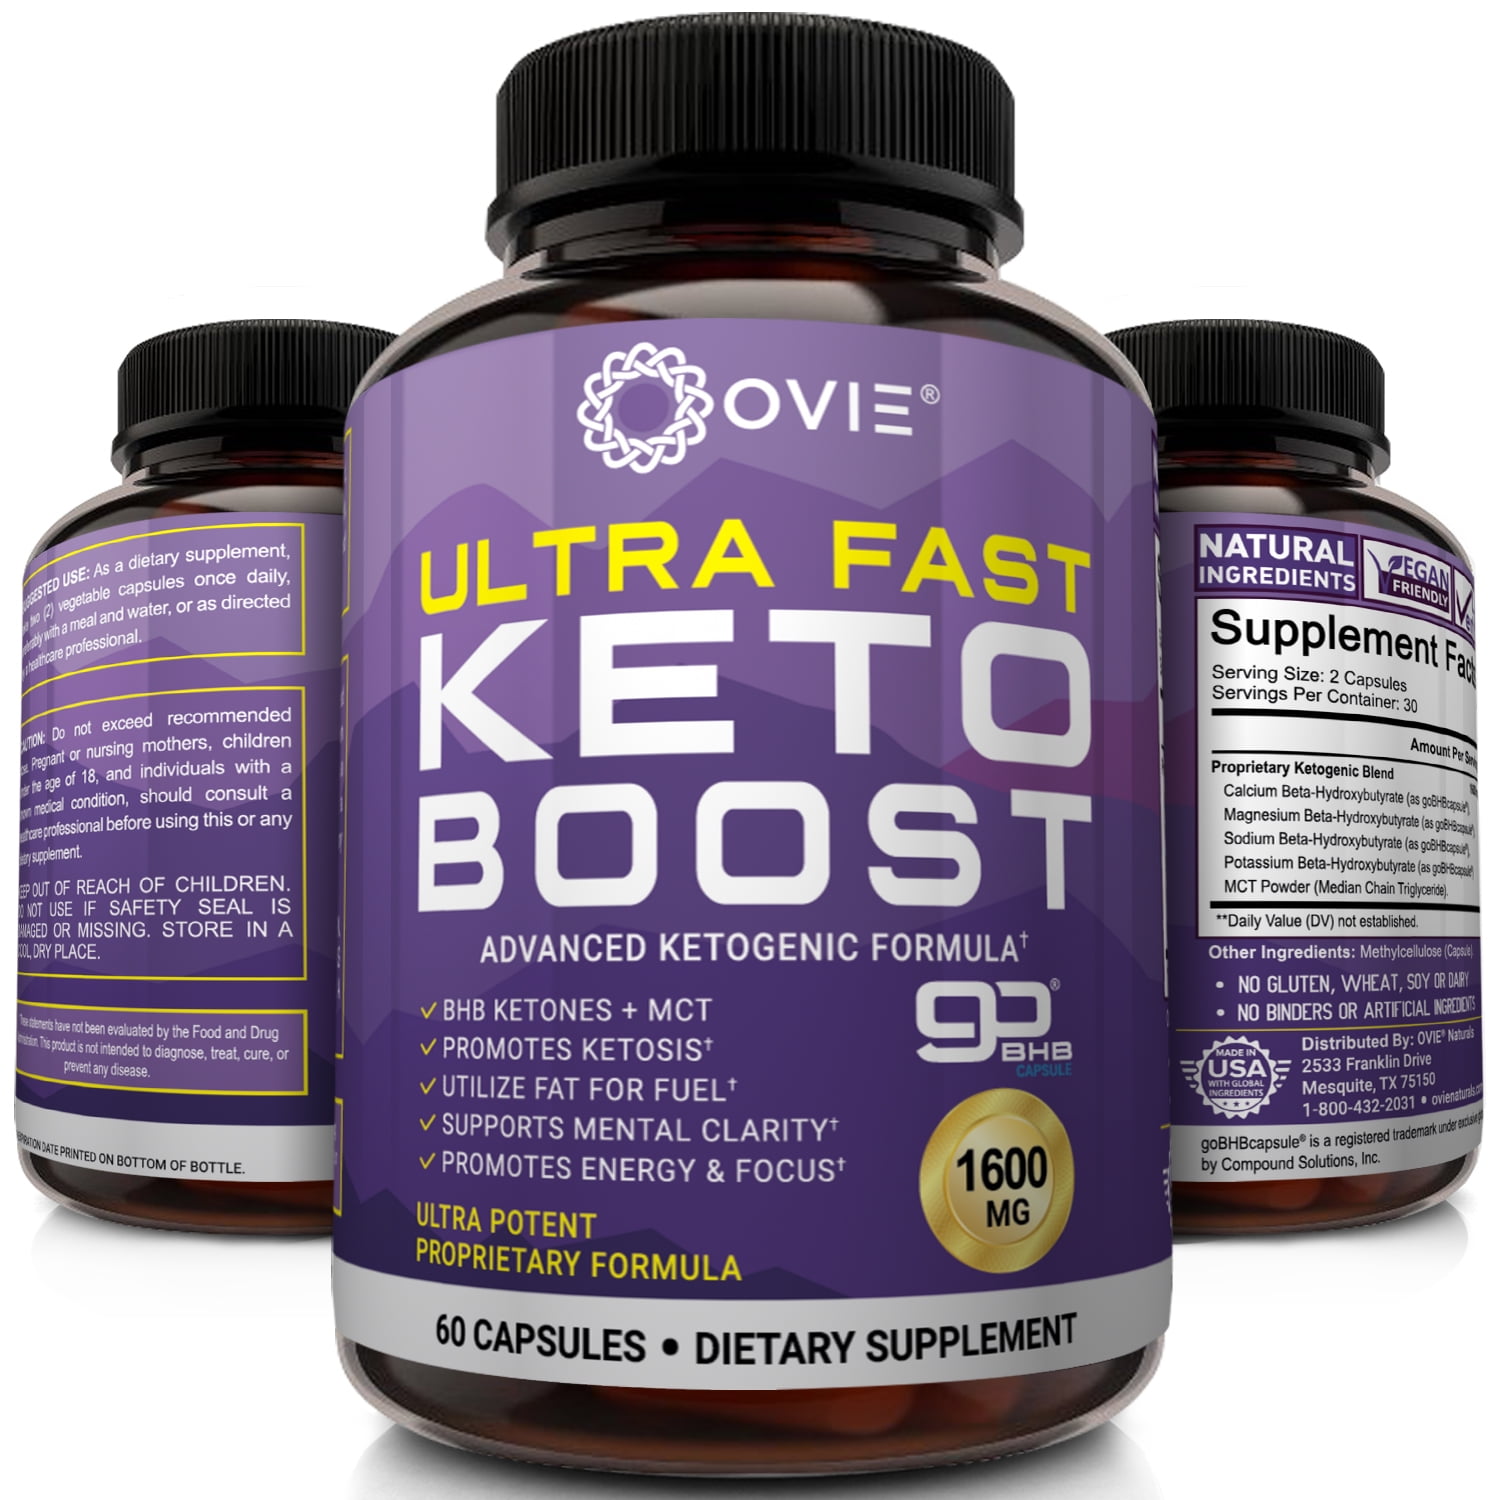 where can you buy ultra fast keto boost